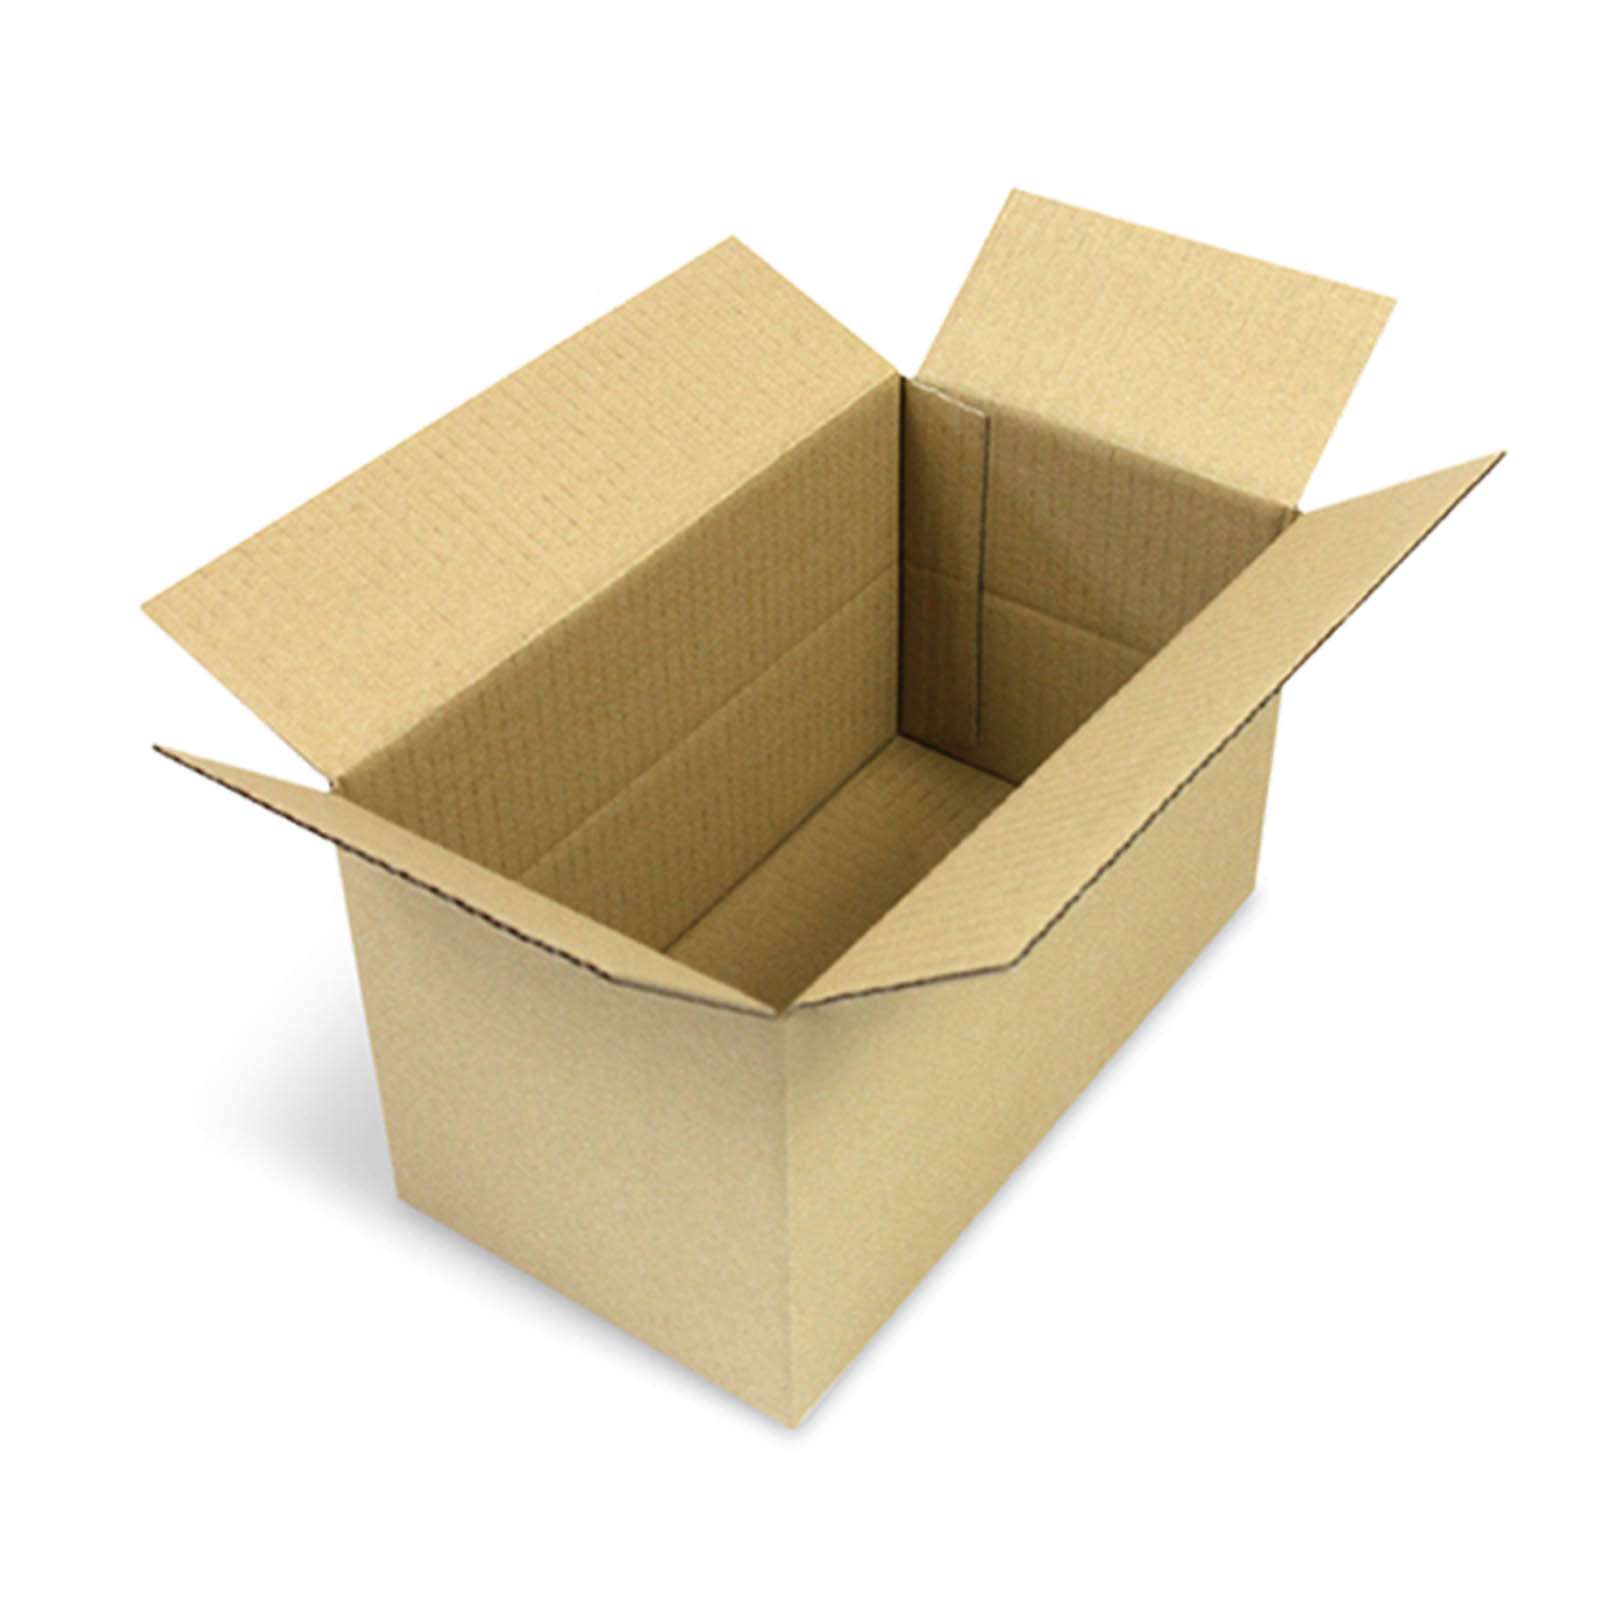 Cardboard box 240x130x130 mm - with digital print 2-sided (neighbouring sides)